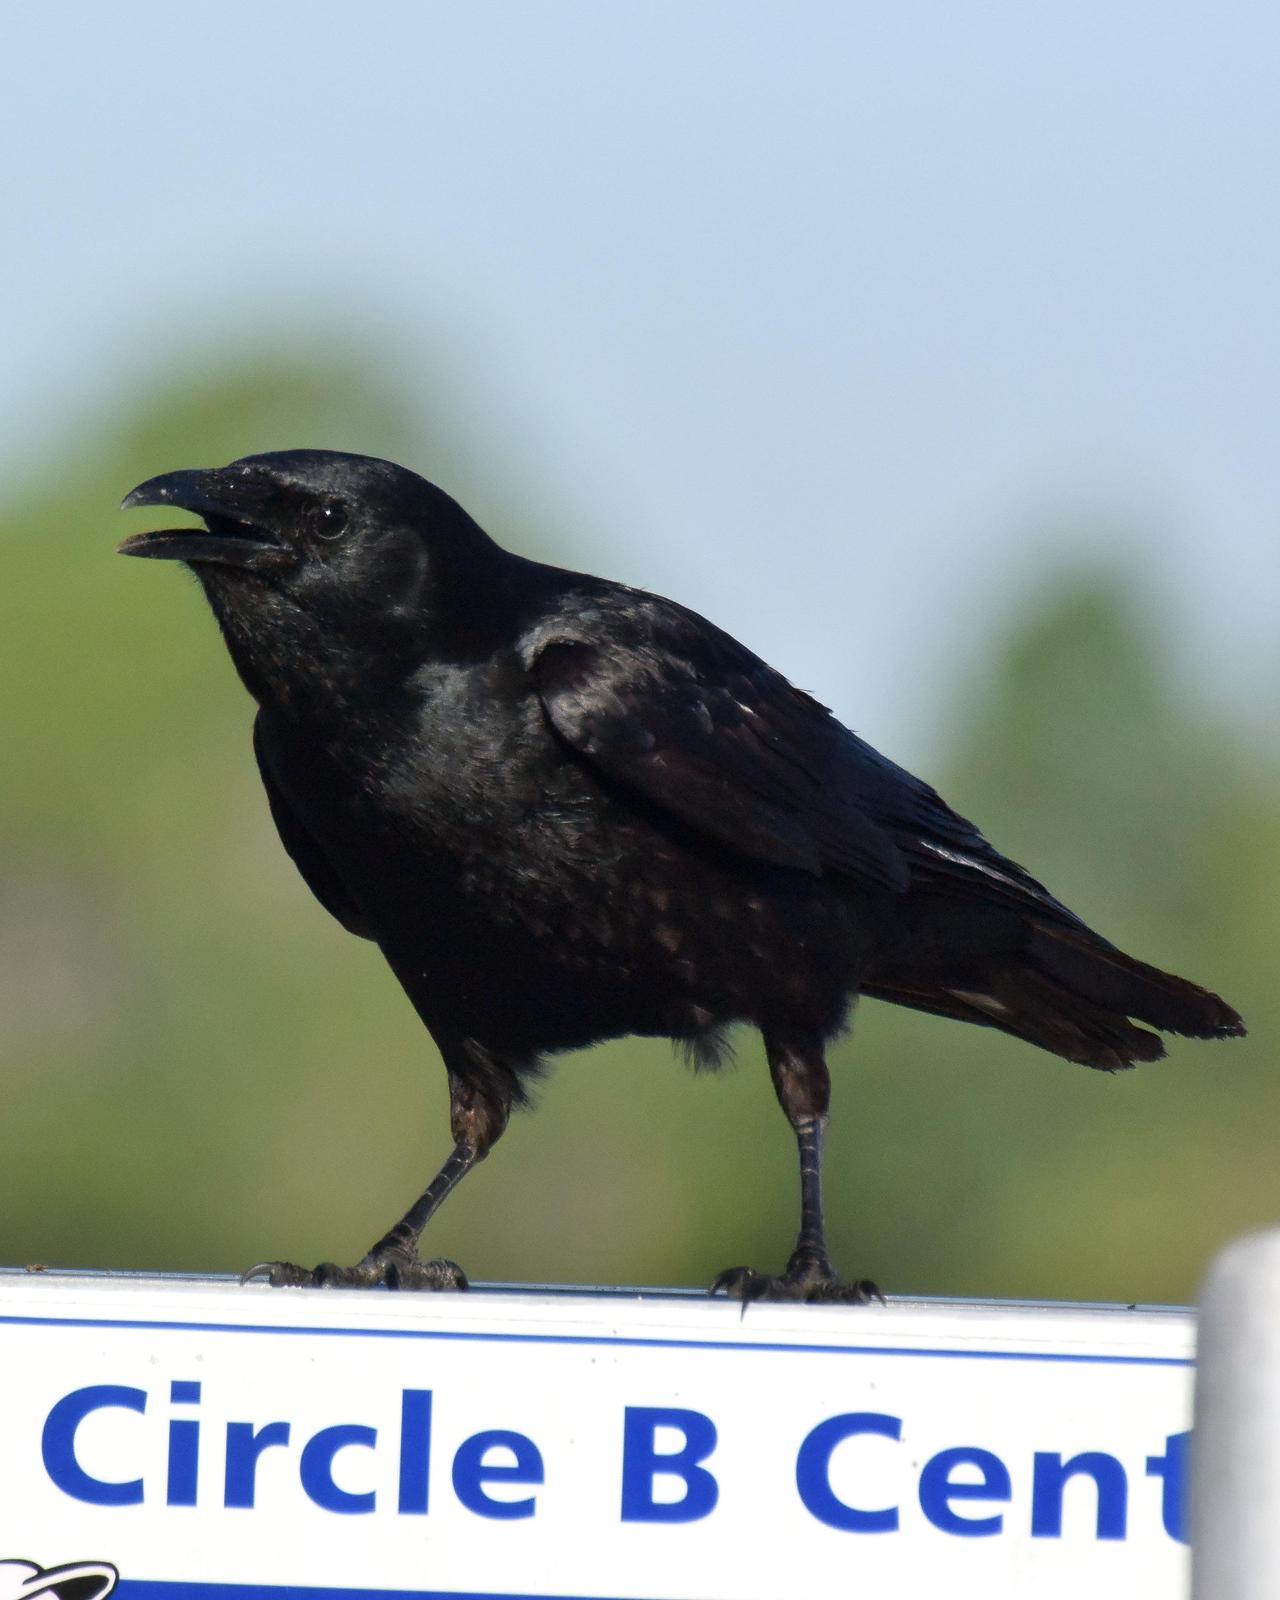 Fish Crow Photo by Emily Percival